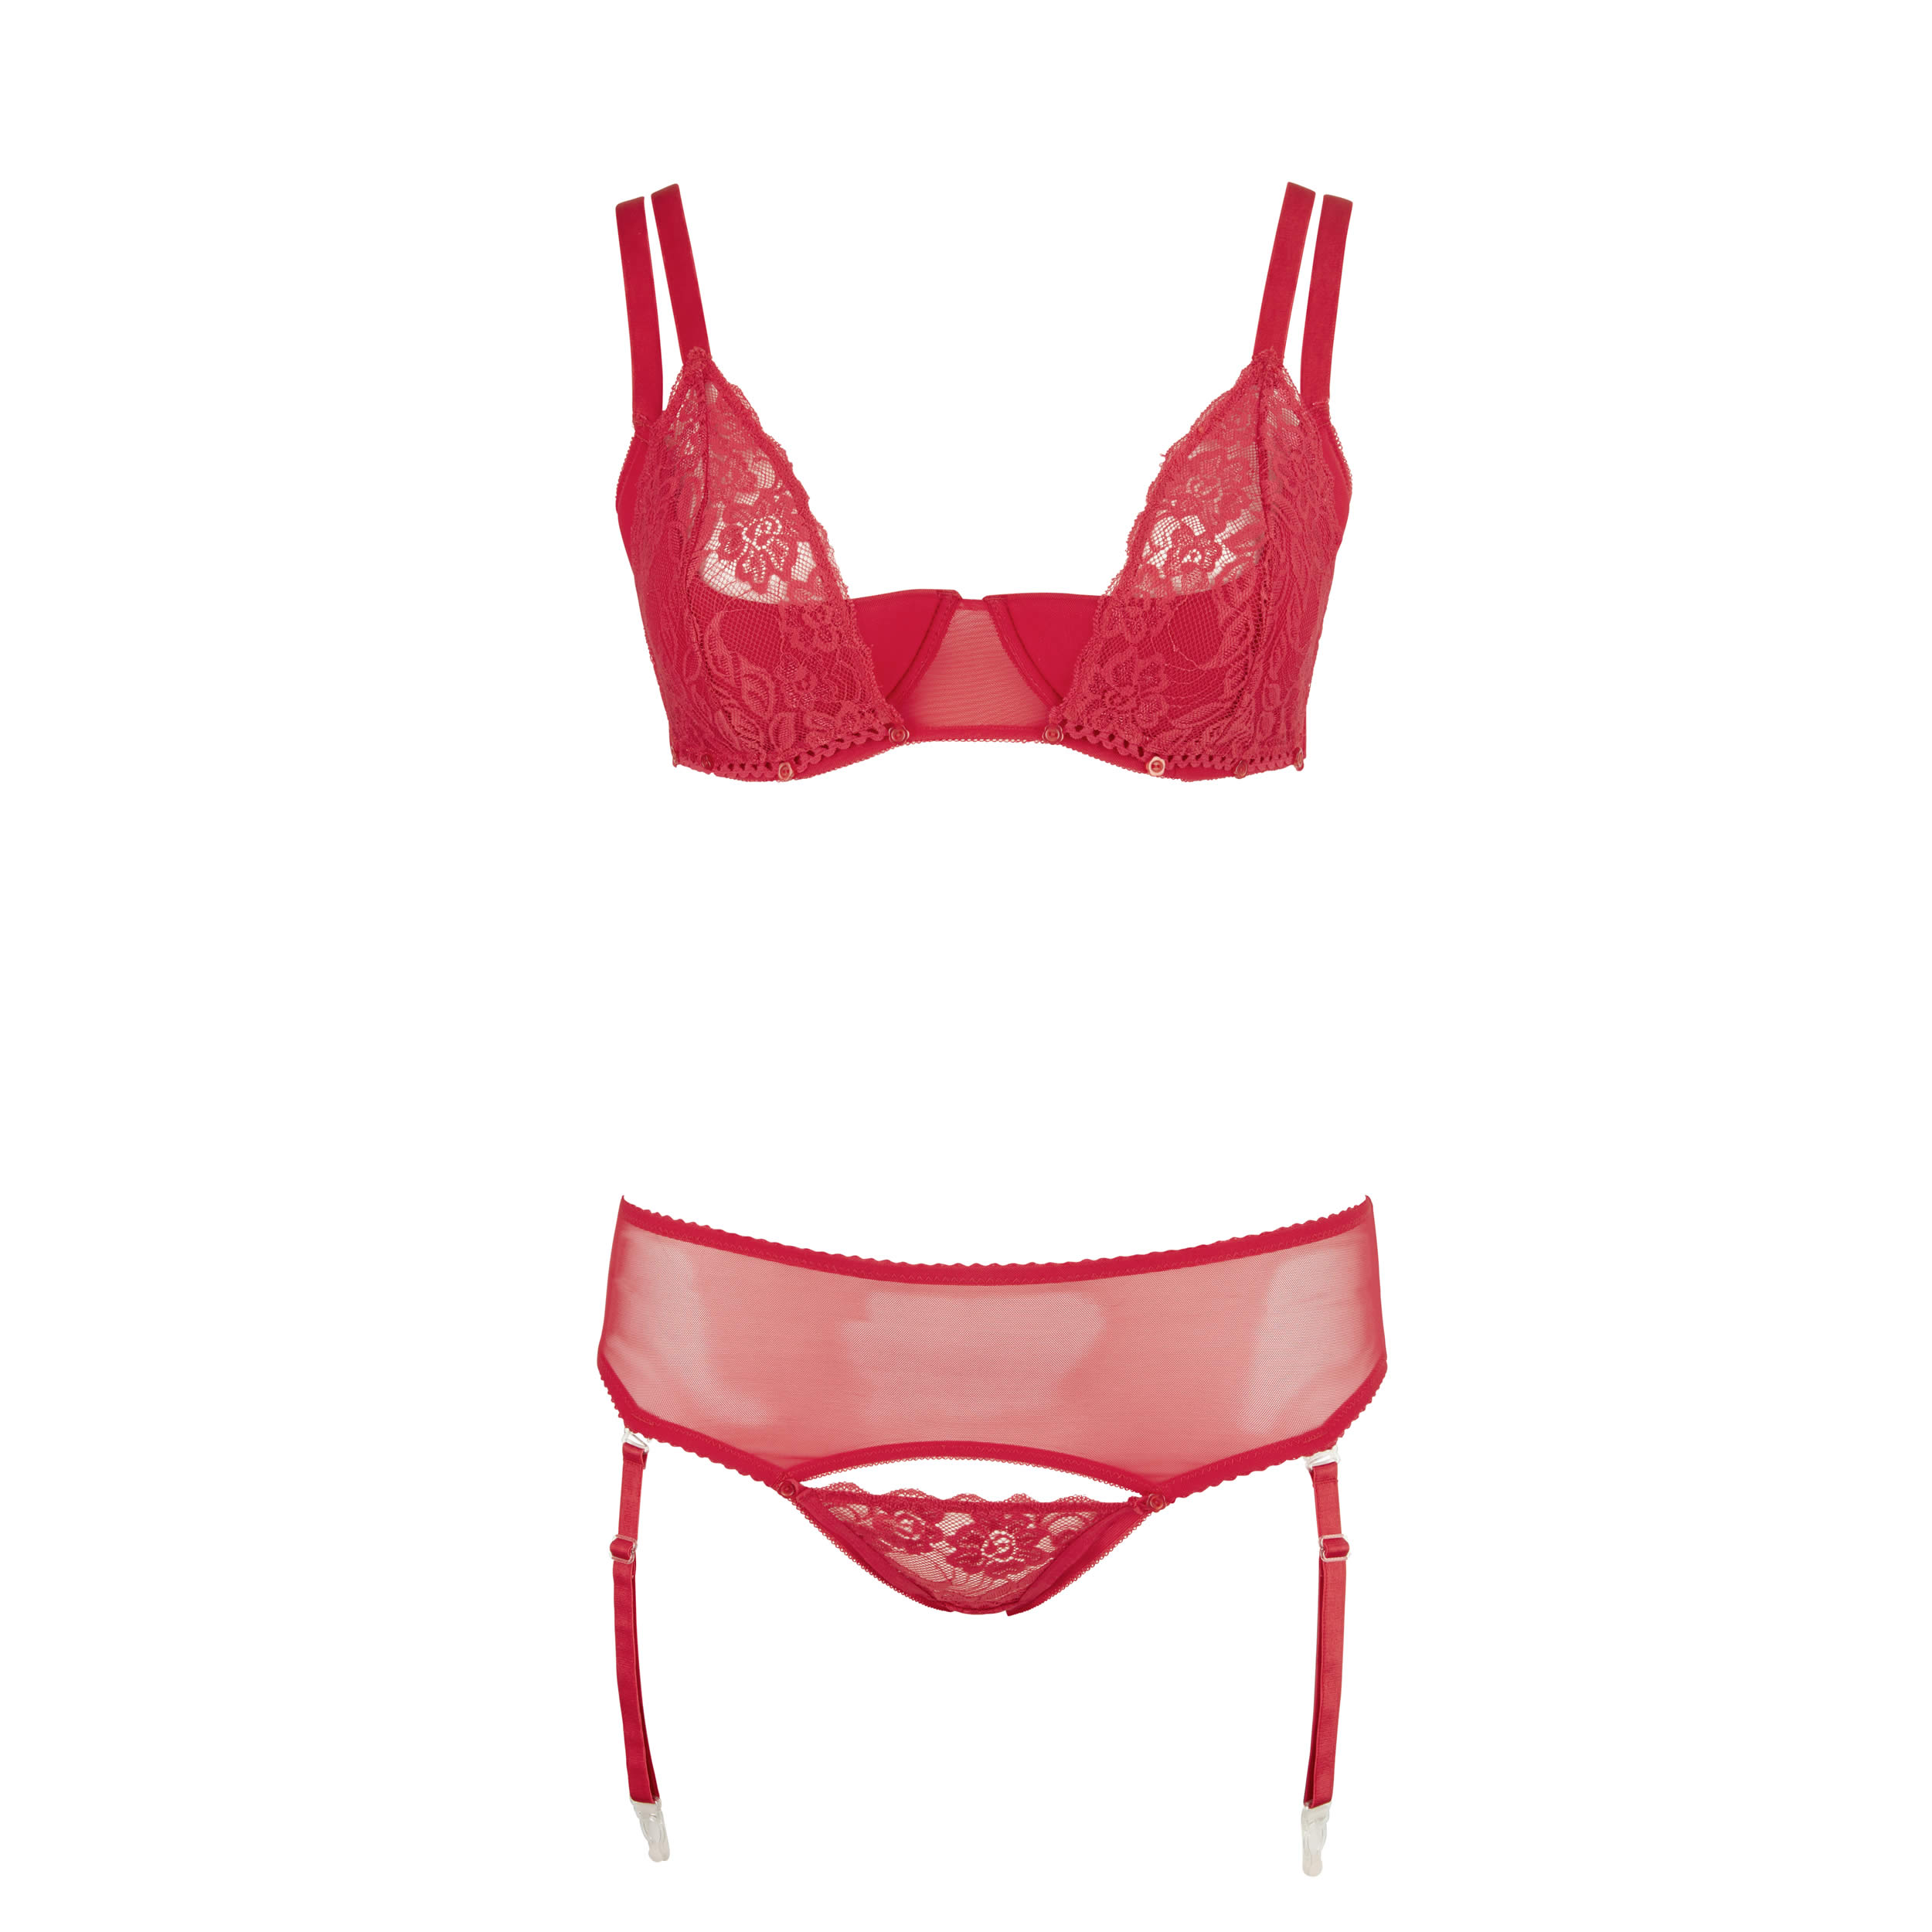 Plus Size Strip Lingerie Set in Red